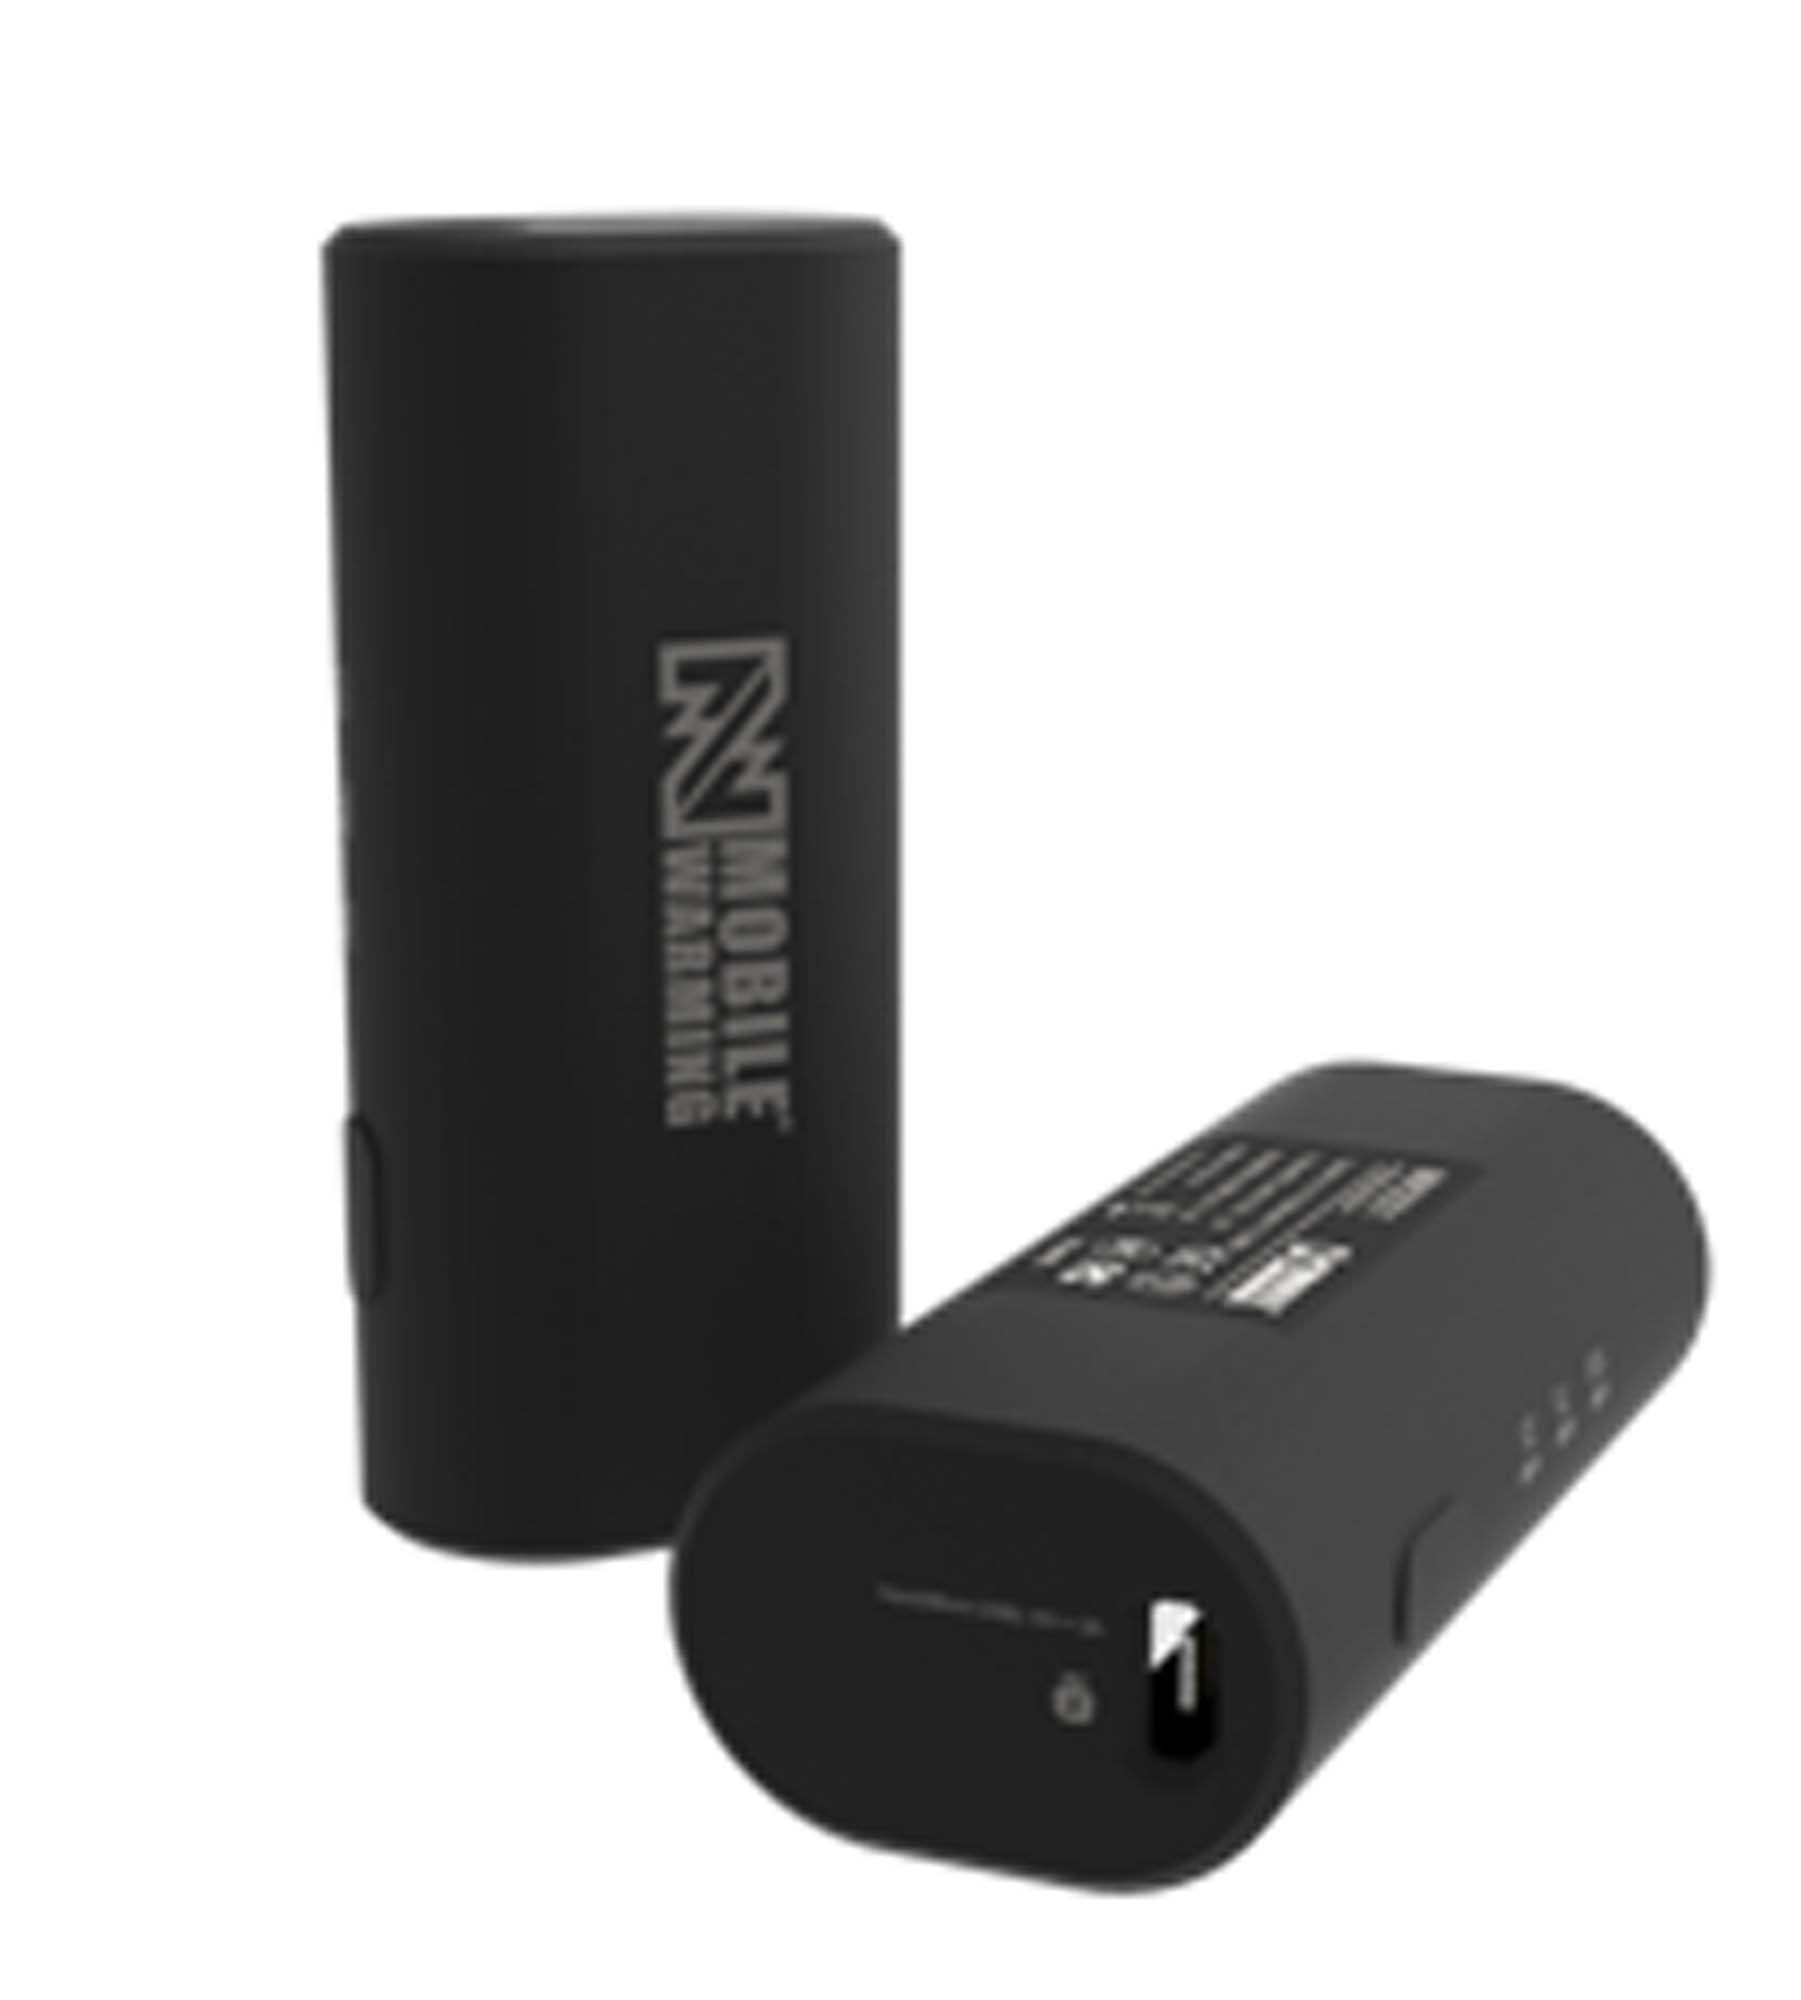 Small Portable Battery Charger USB Power Bank for Thermal Heated Clothing  5V 2A